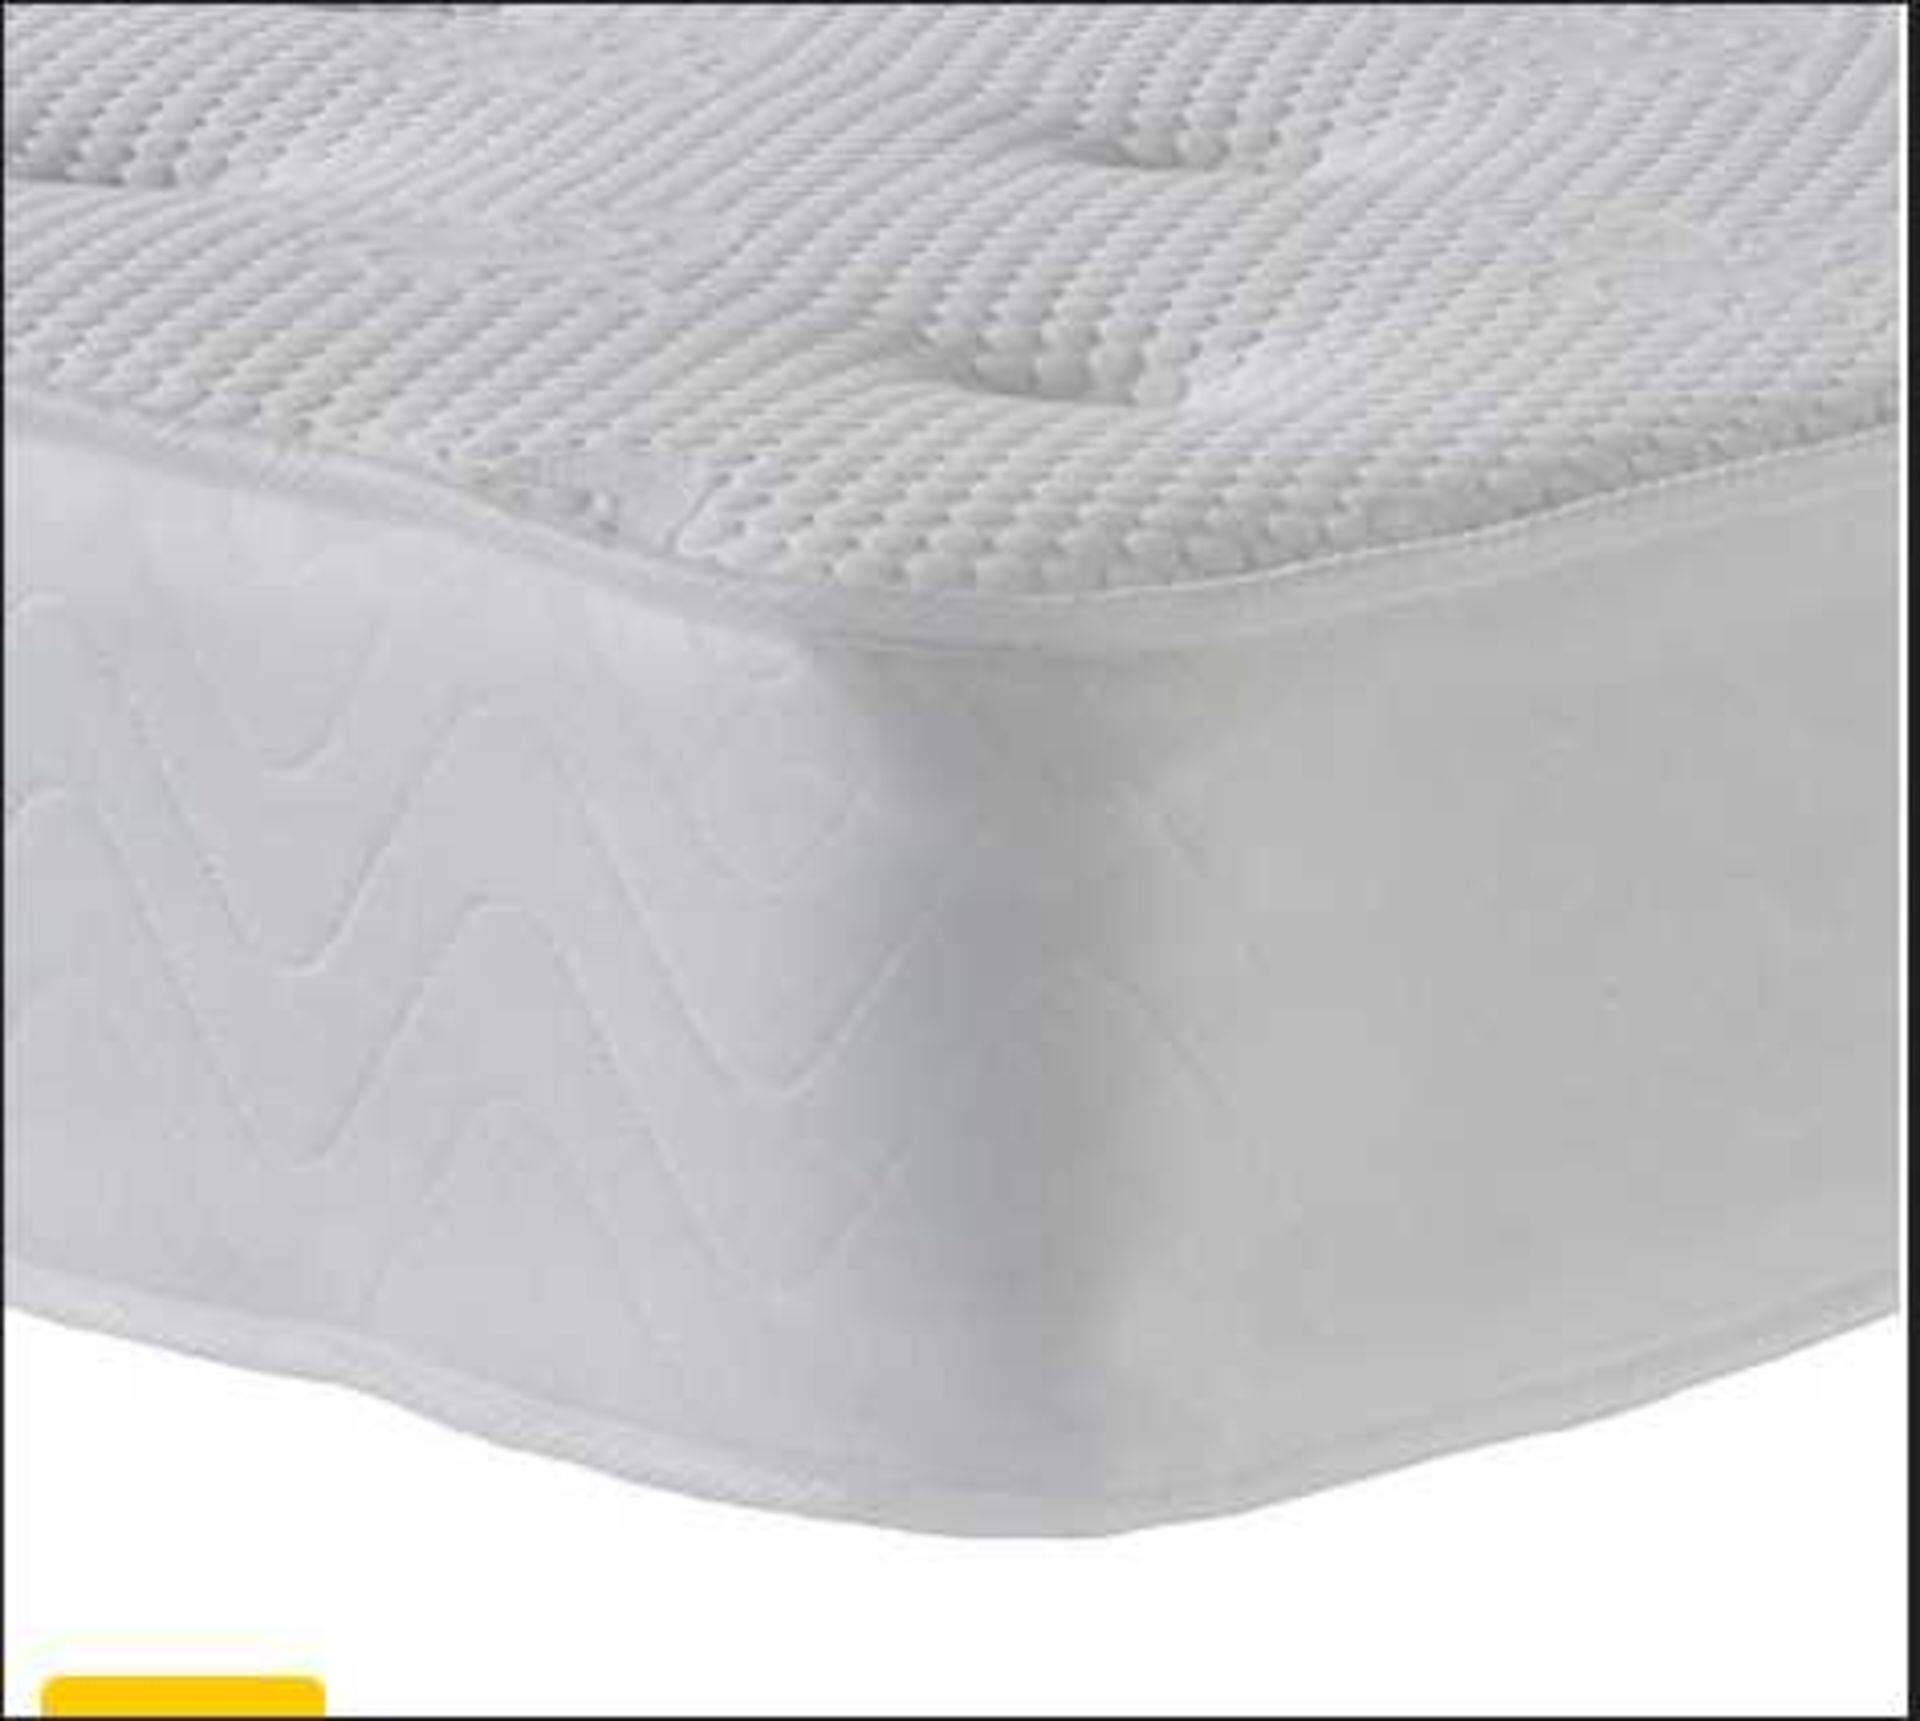 | 1X | SLEEPRIGHT GENOA BED MATTRESS 4FT SMALL DOUBLE | DIRTY MARKS PRESENT DUE TO DAMAGED PACKAGING